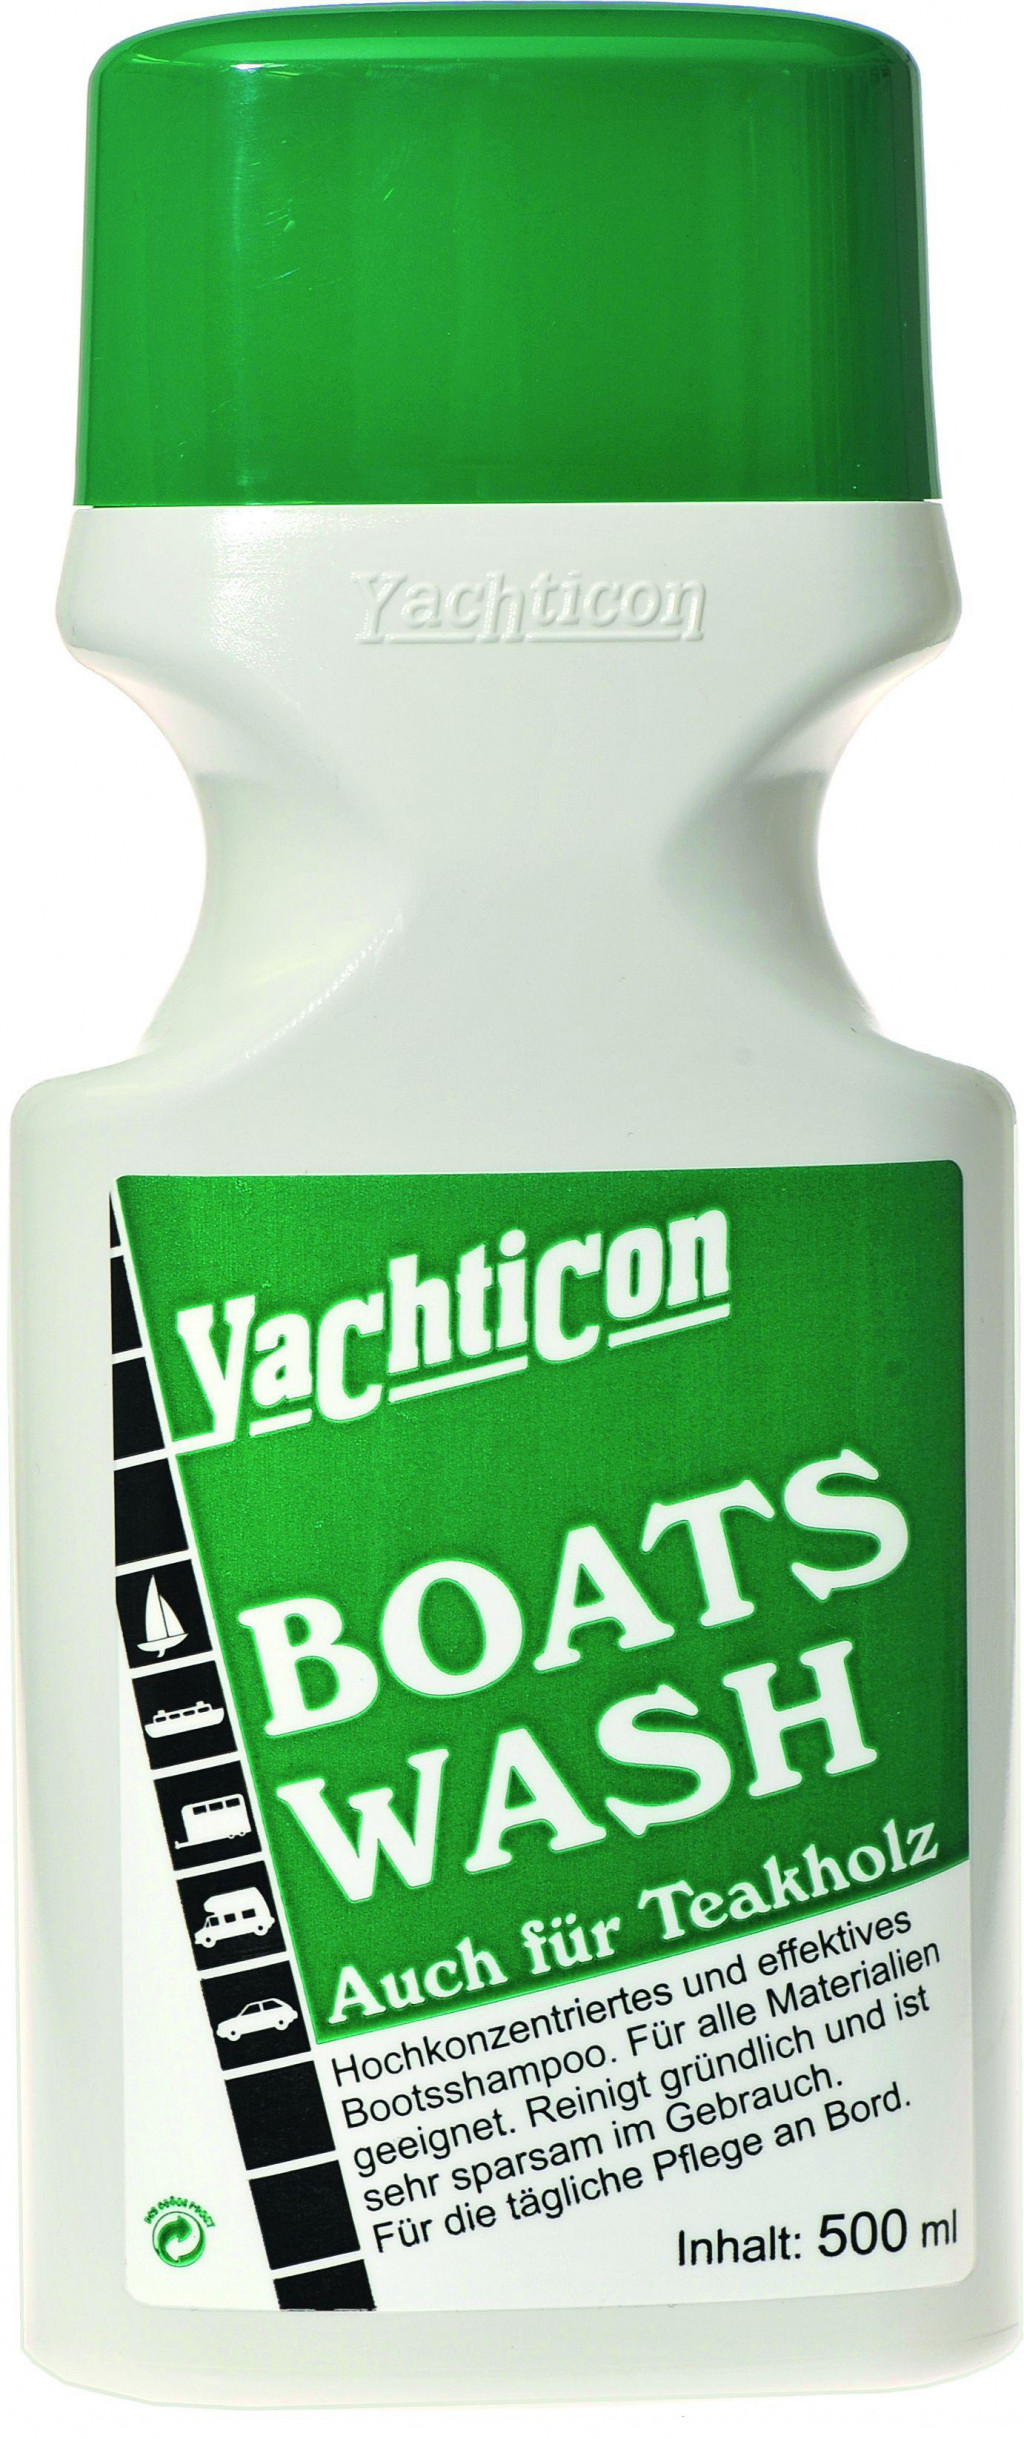 &lt;p&gt;Yachticon Boats Wash&lt;/p&gt;